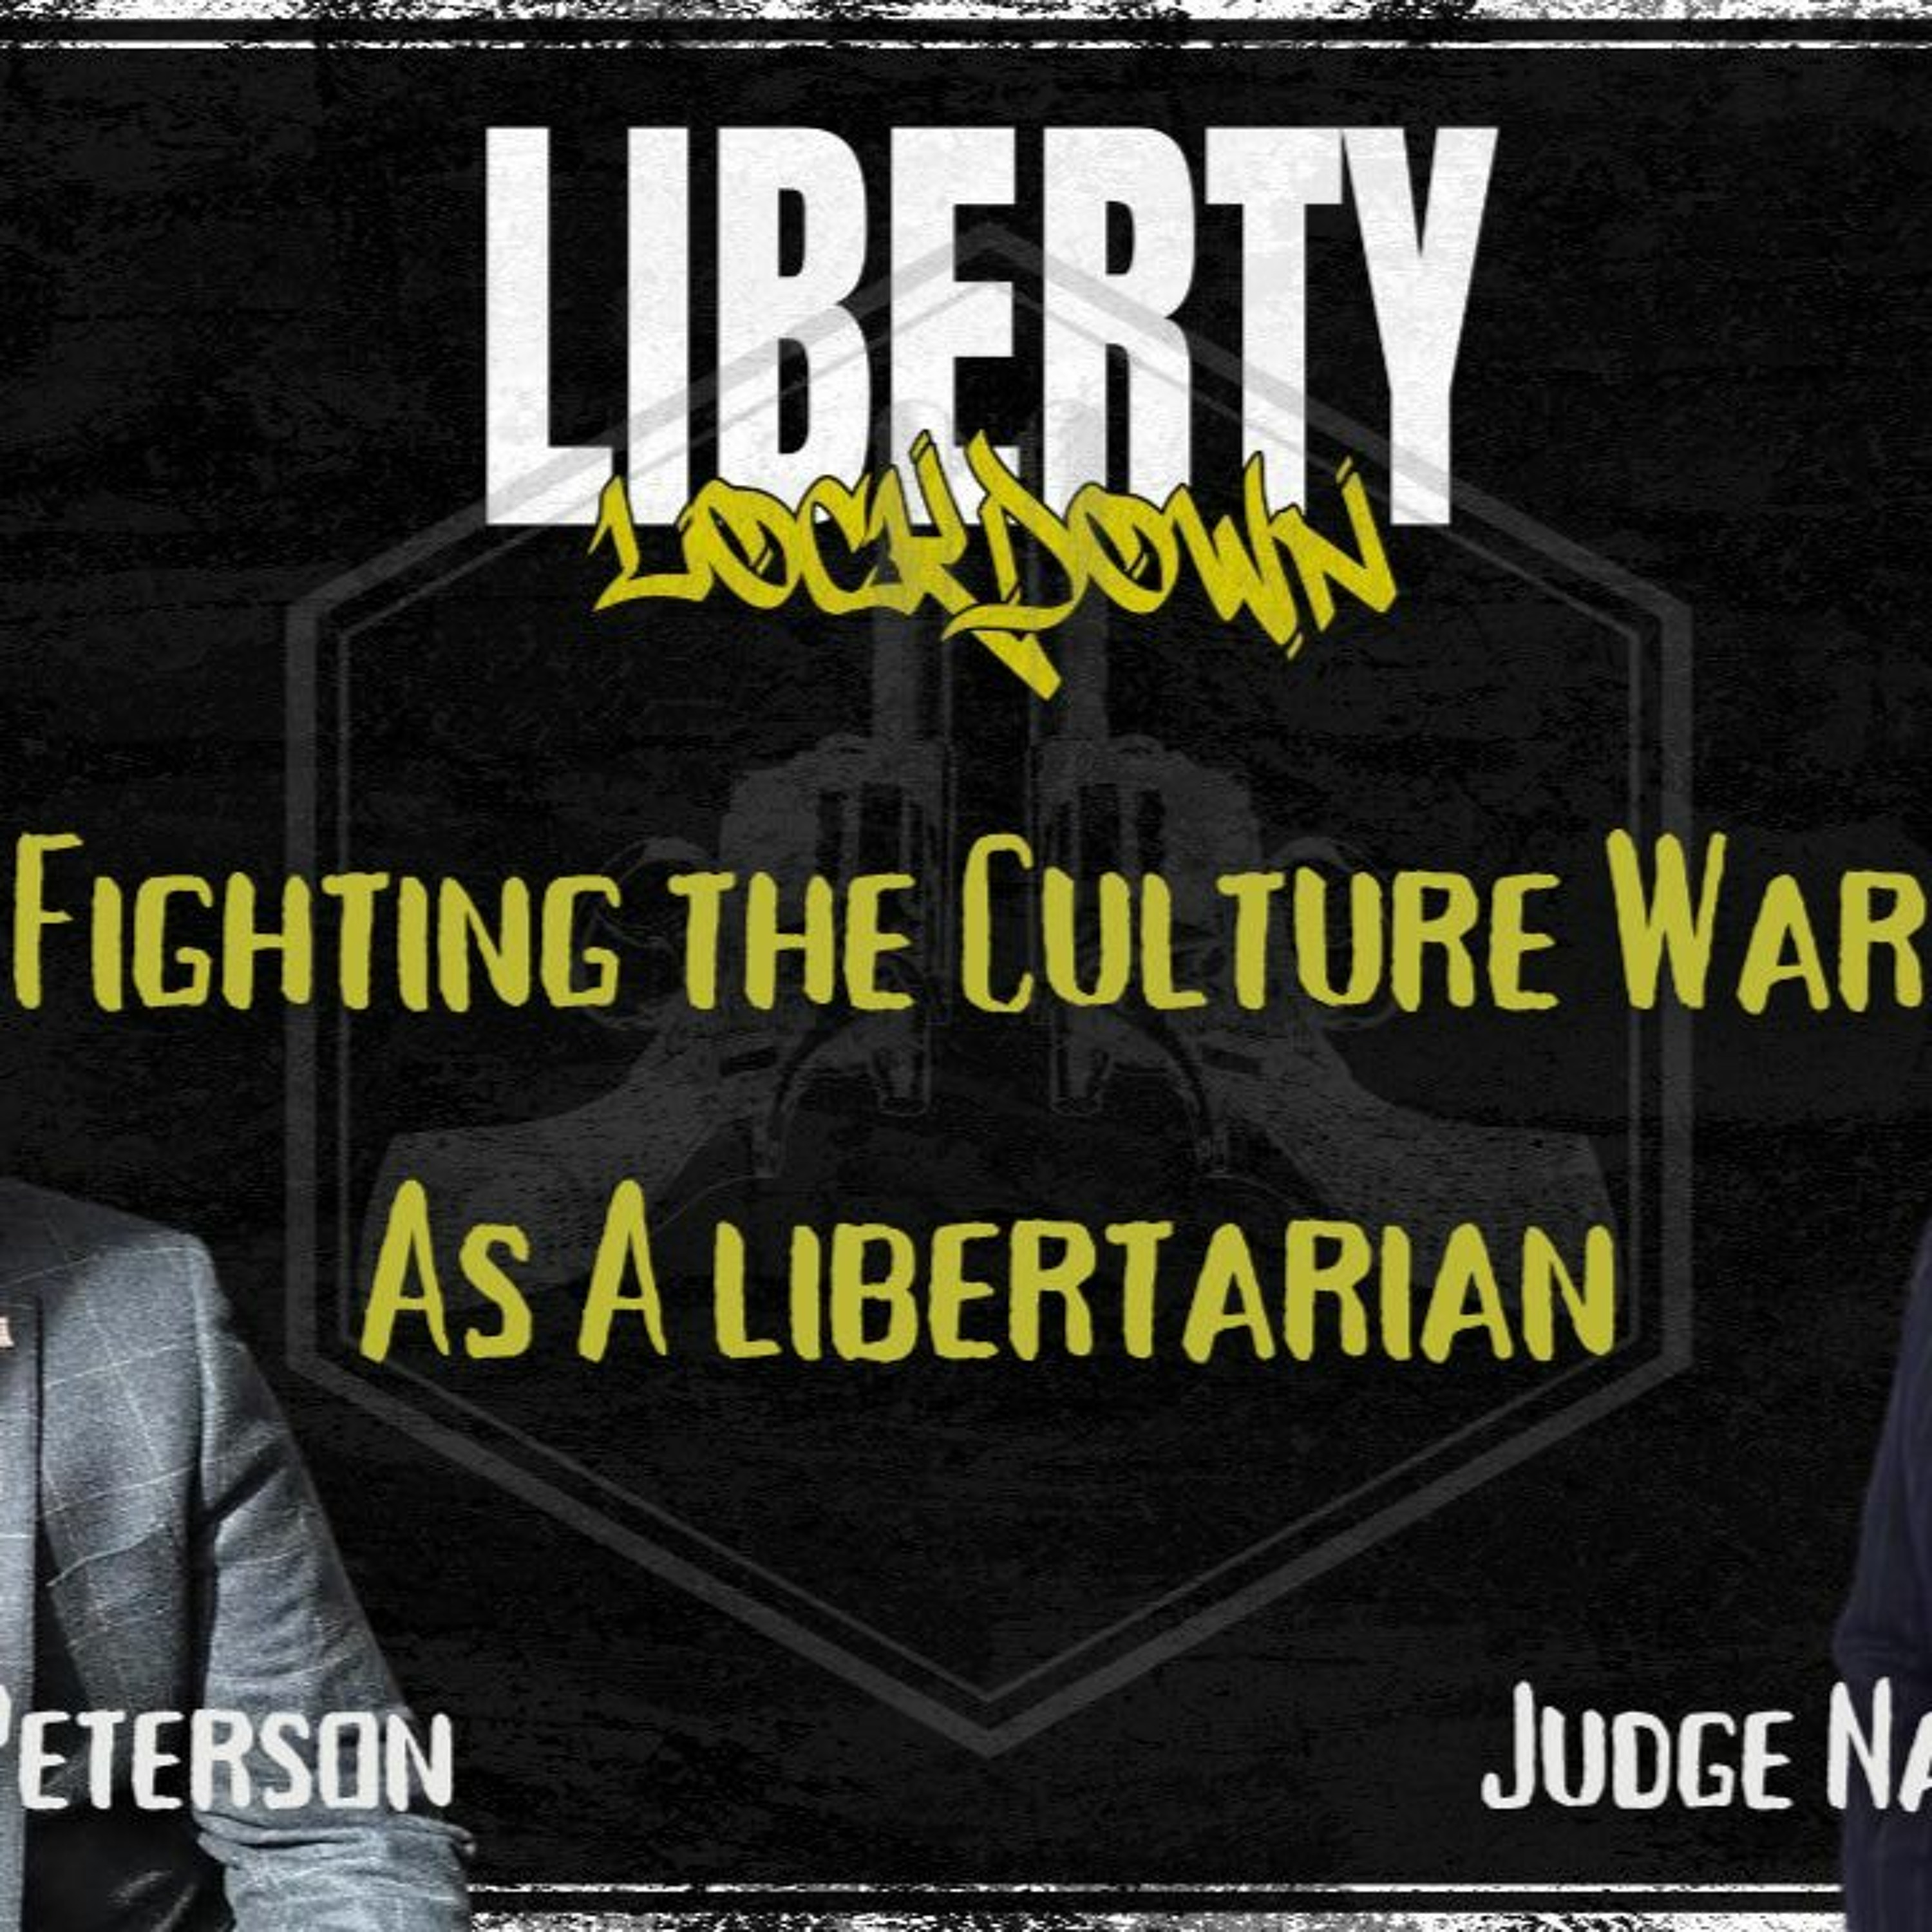 Ep 177 Fighting the Culture War as a libertarian with Austin Petersen & Judge Napolitano